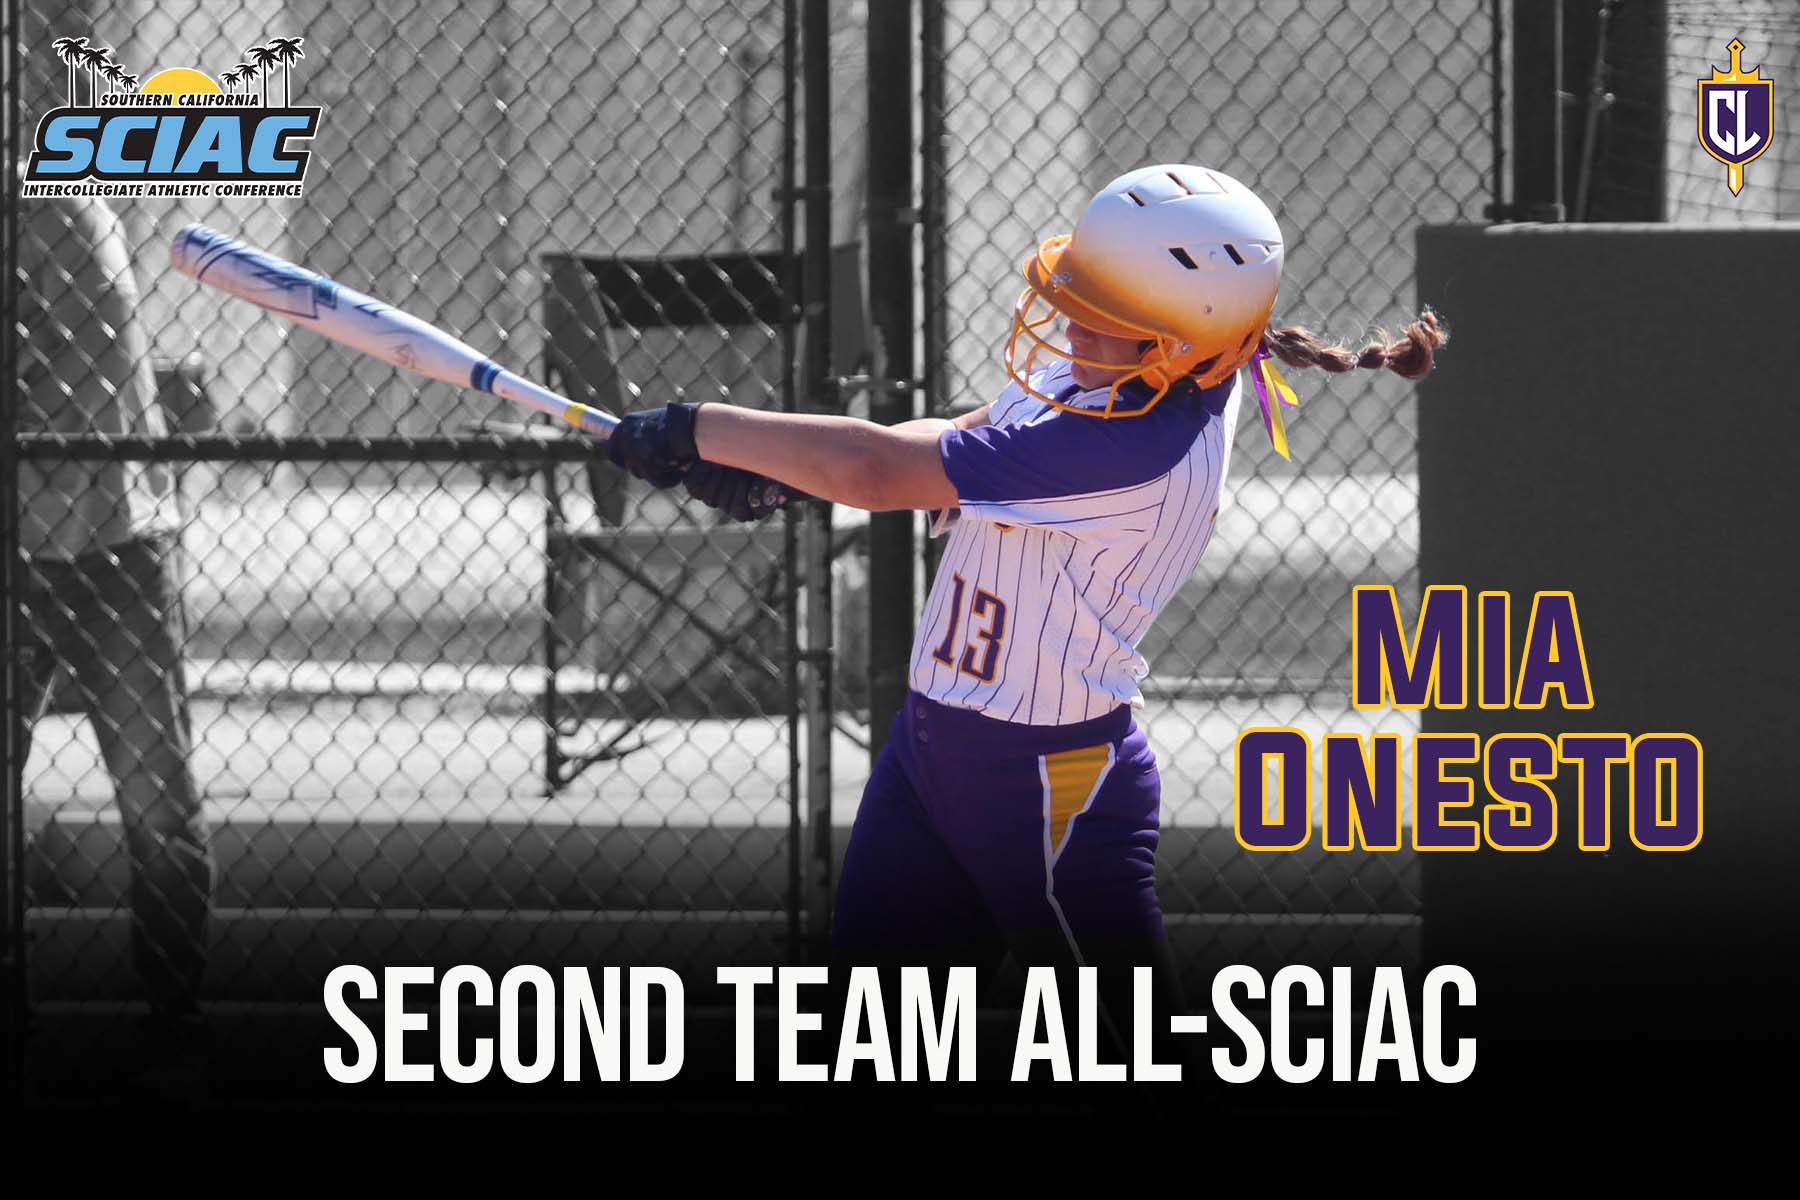 Onesto Earns All-SCIAC; Second Straight Year